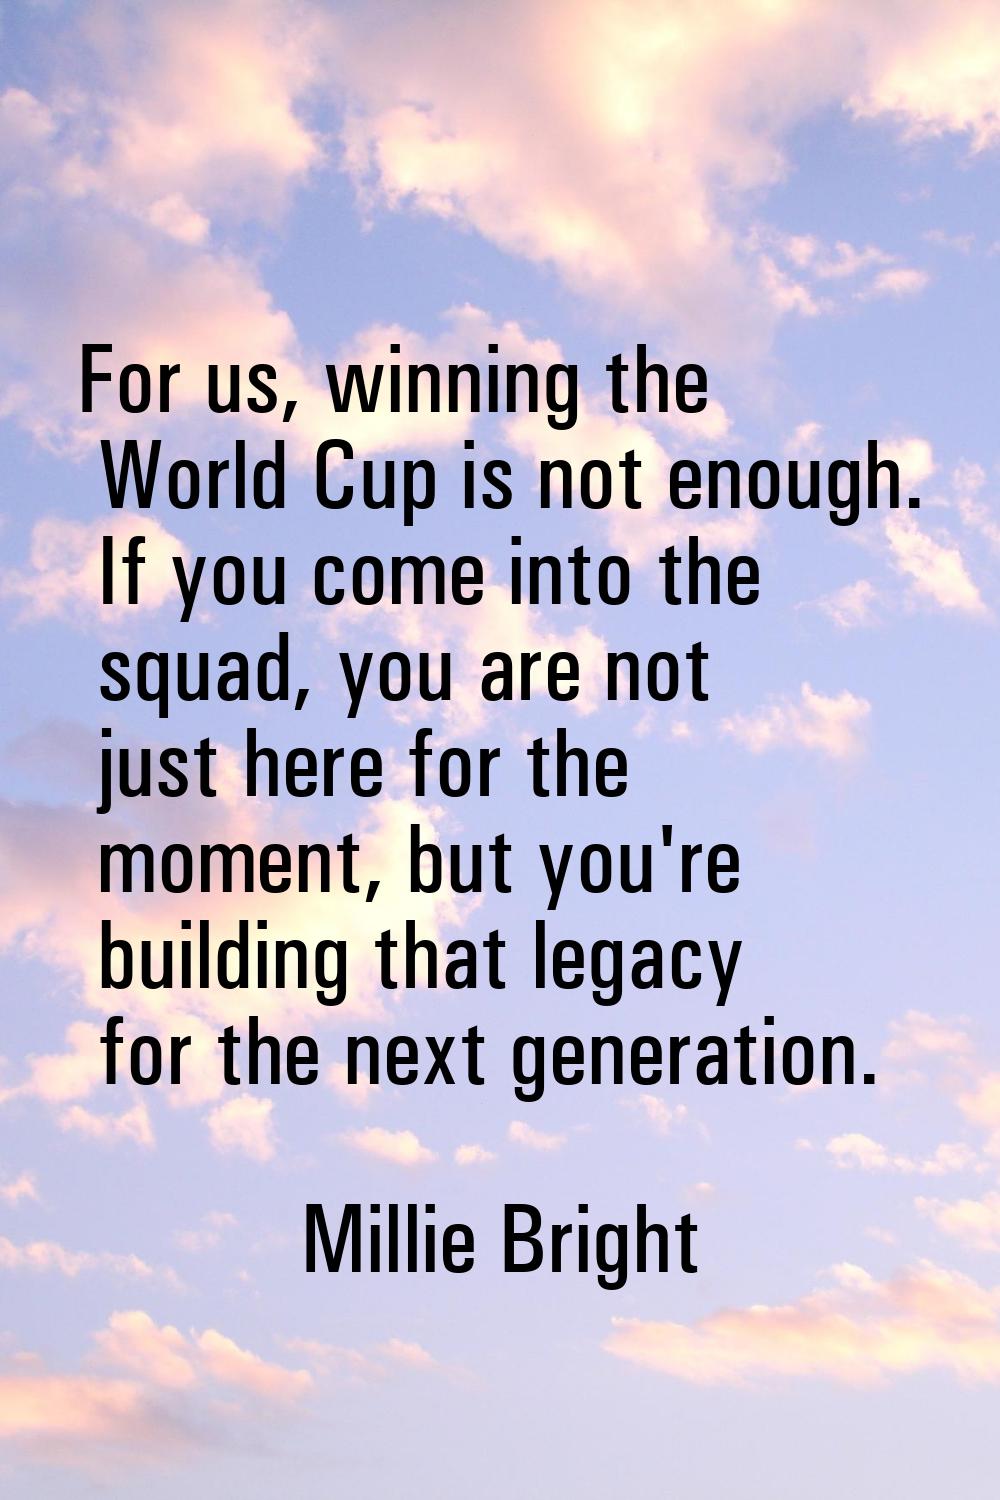 For us, winning the World Cup is not enough. If you come into the squad, you are not just here for 